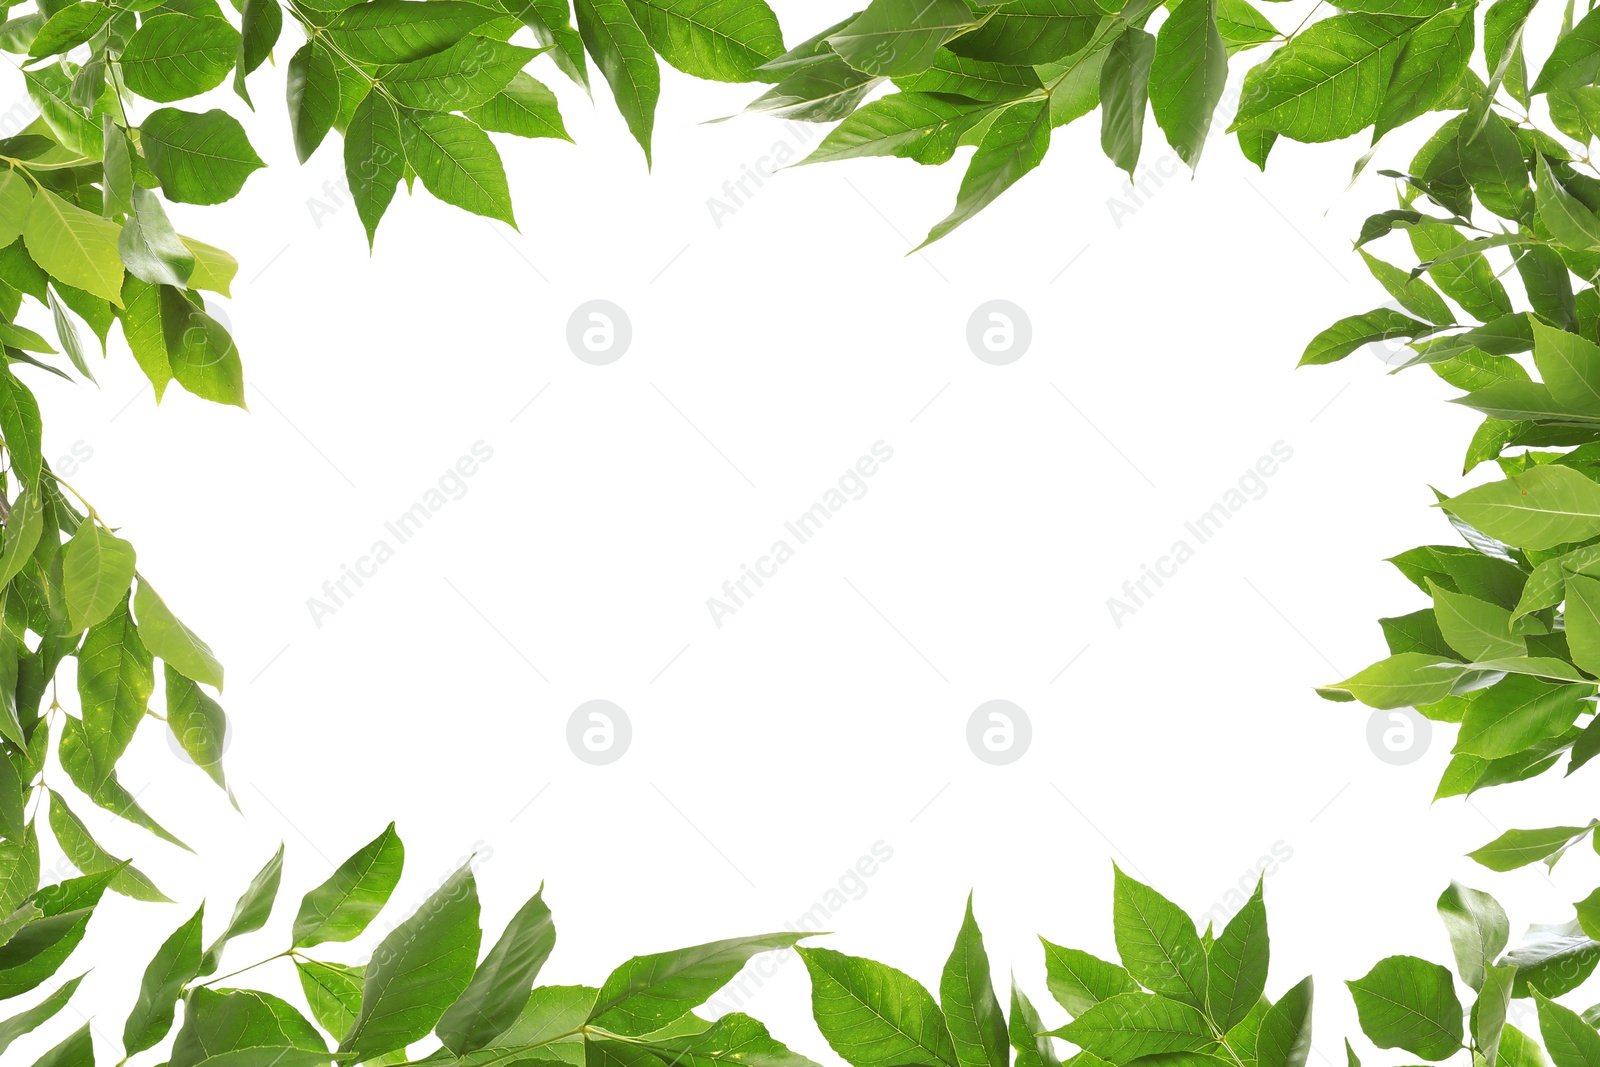 Image of Frame of beautiful vibrant green leaves on white background